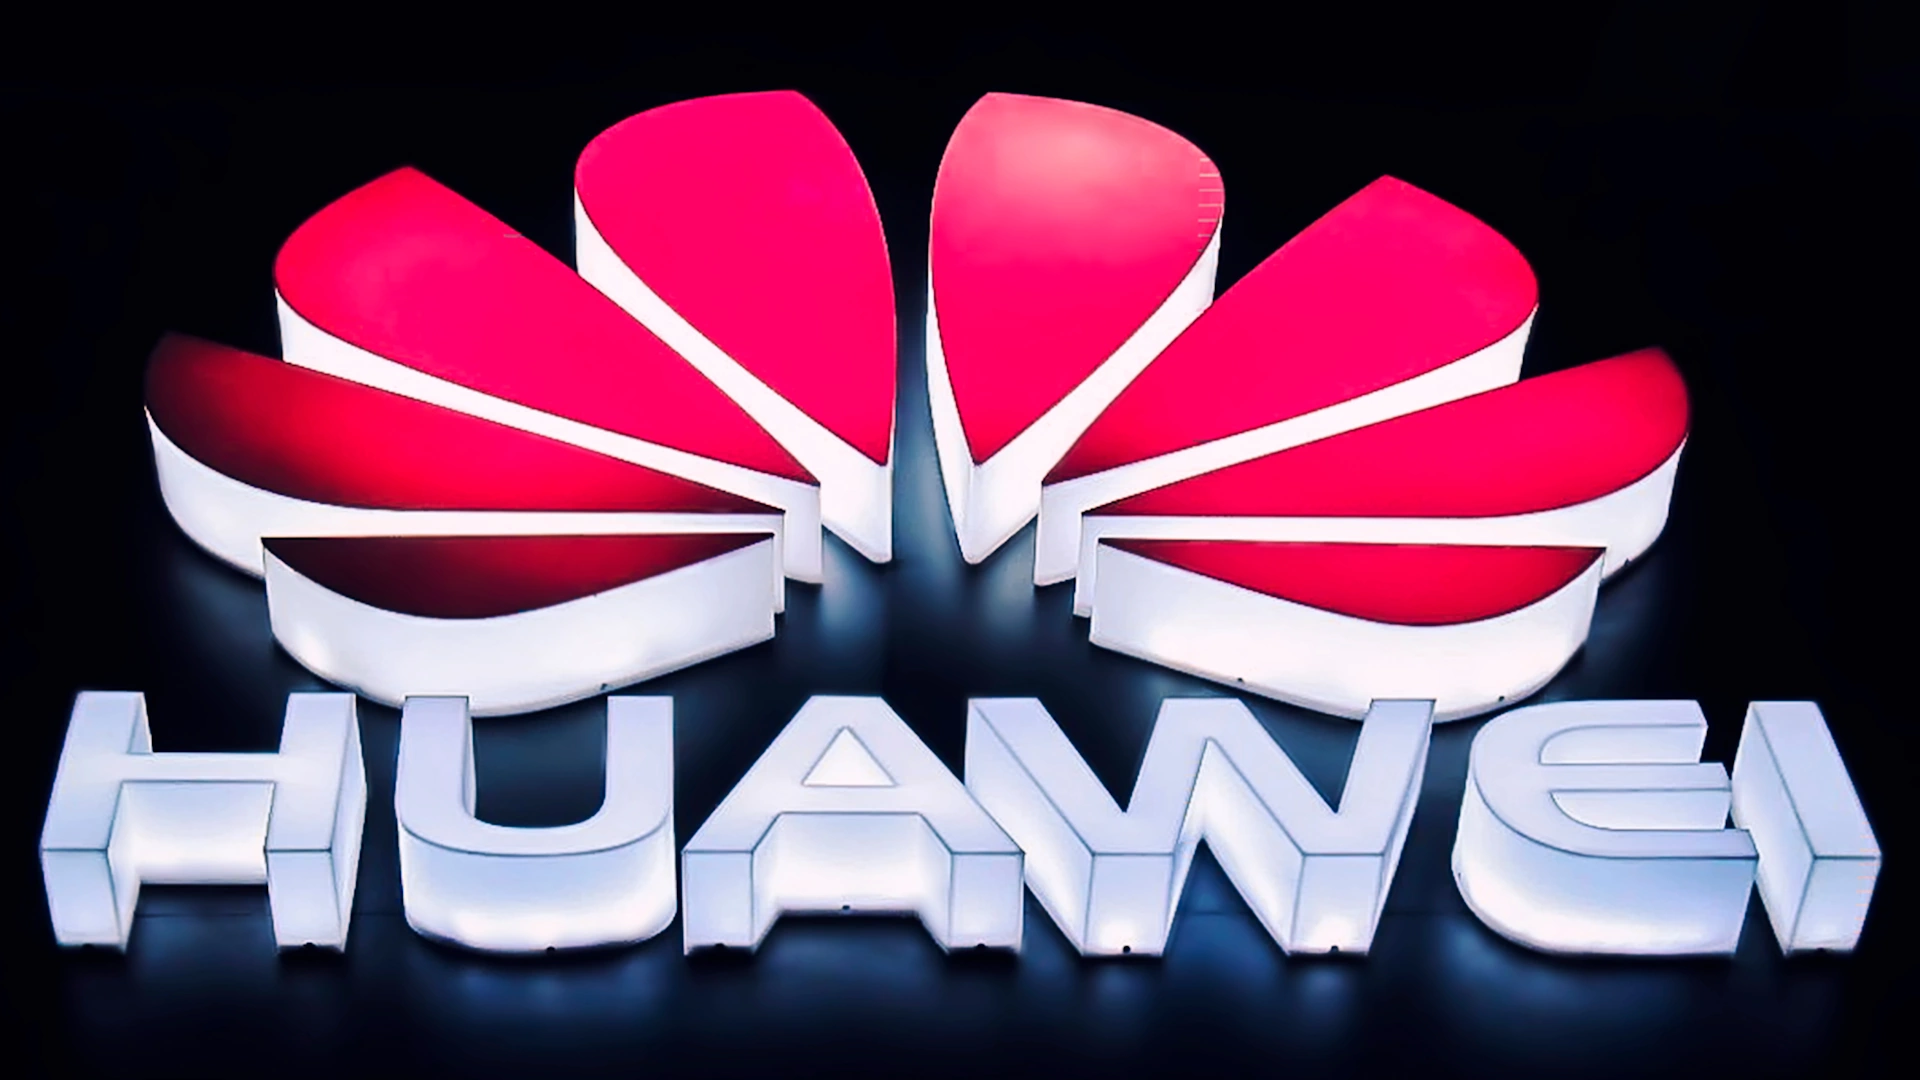 Huawei’s plan to switch to native HarmonyOS causes developer job postings to spike in China